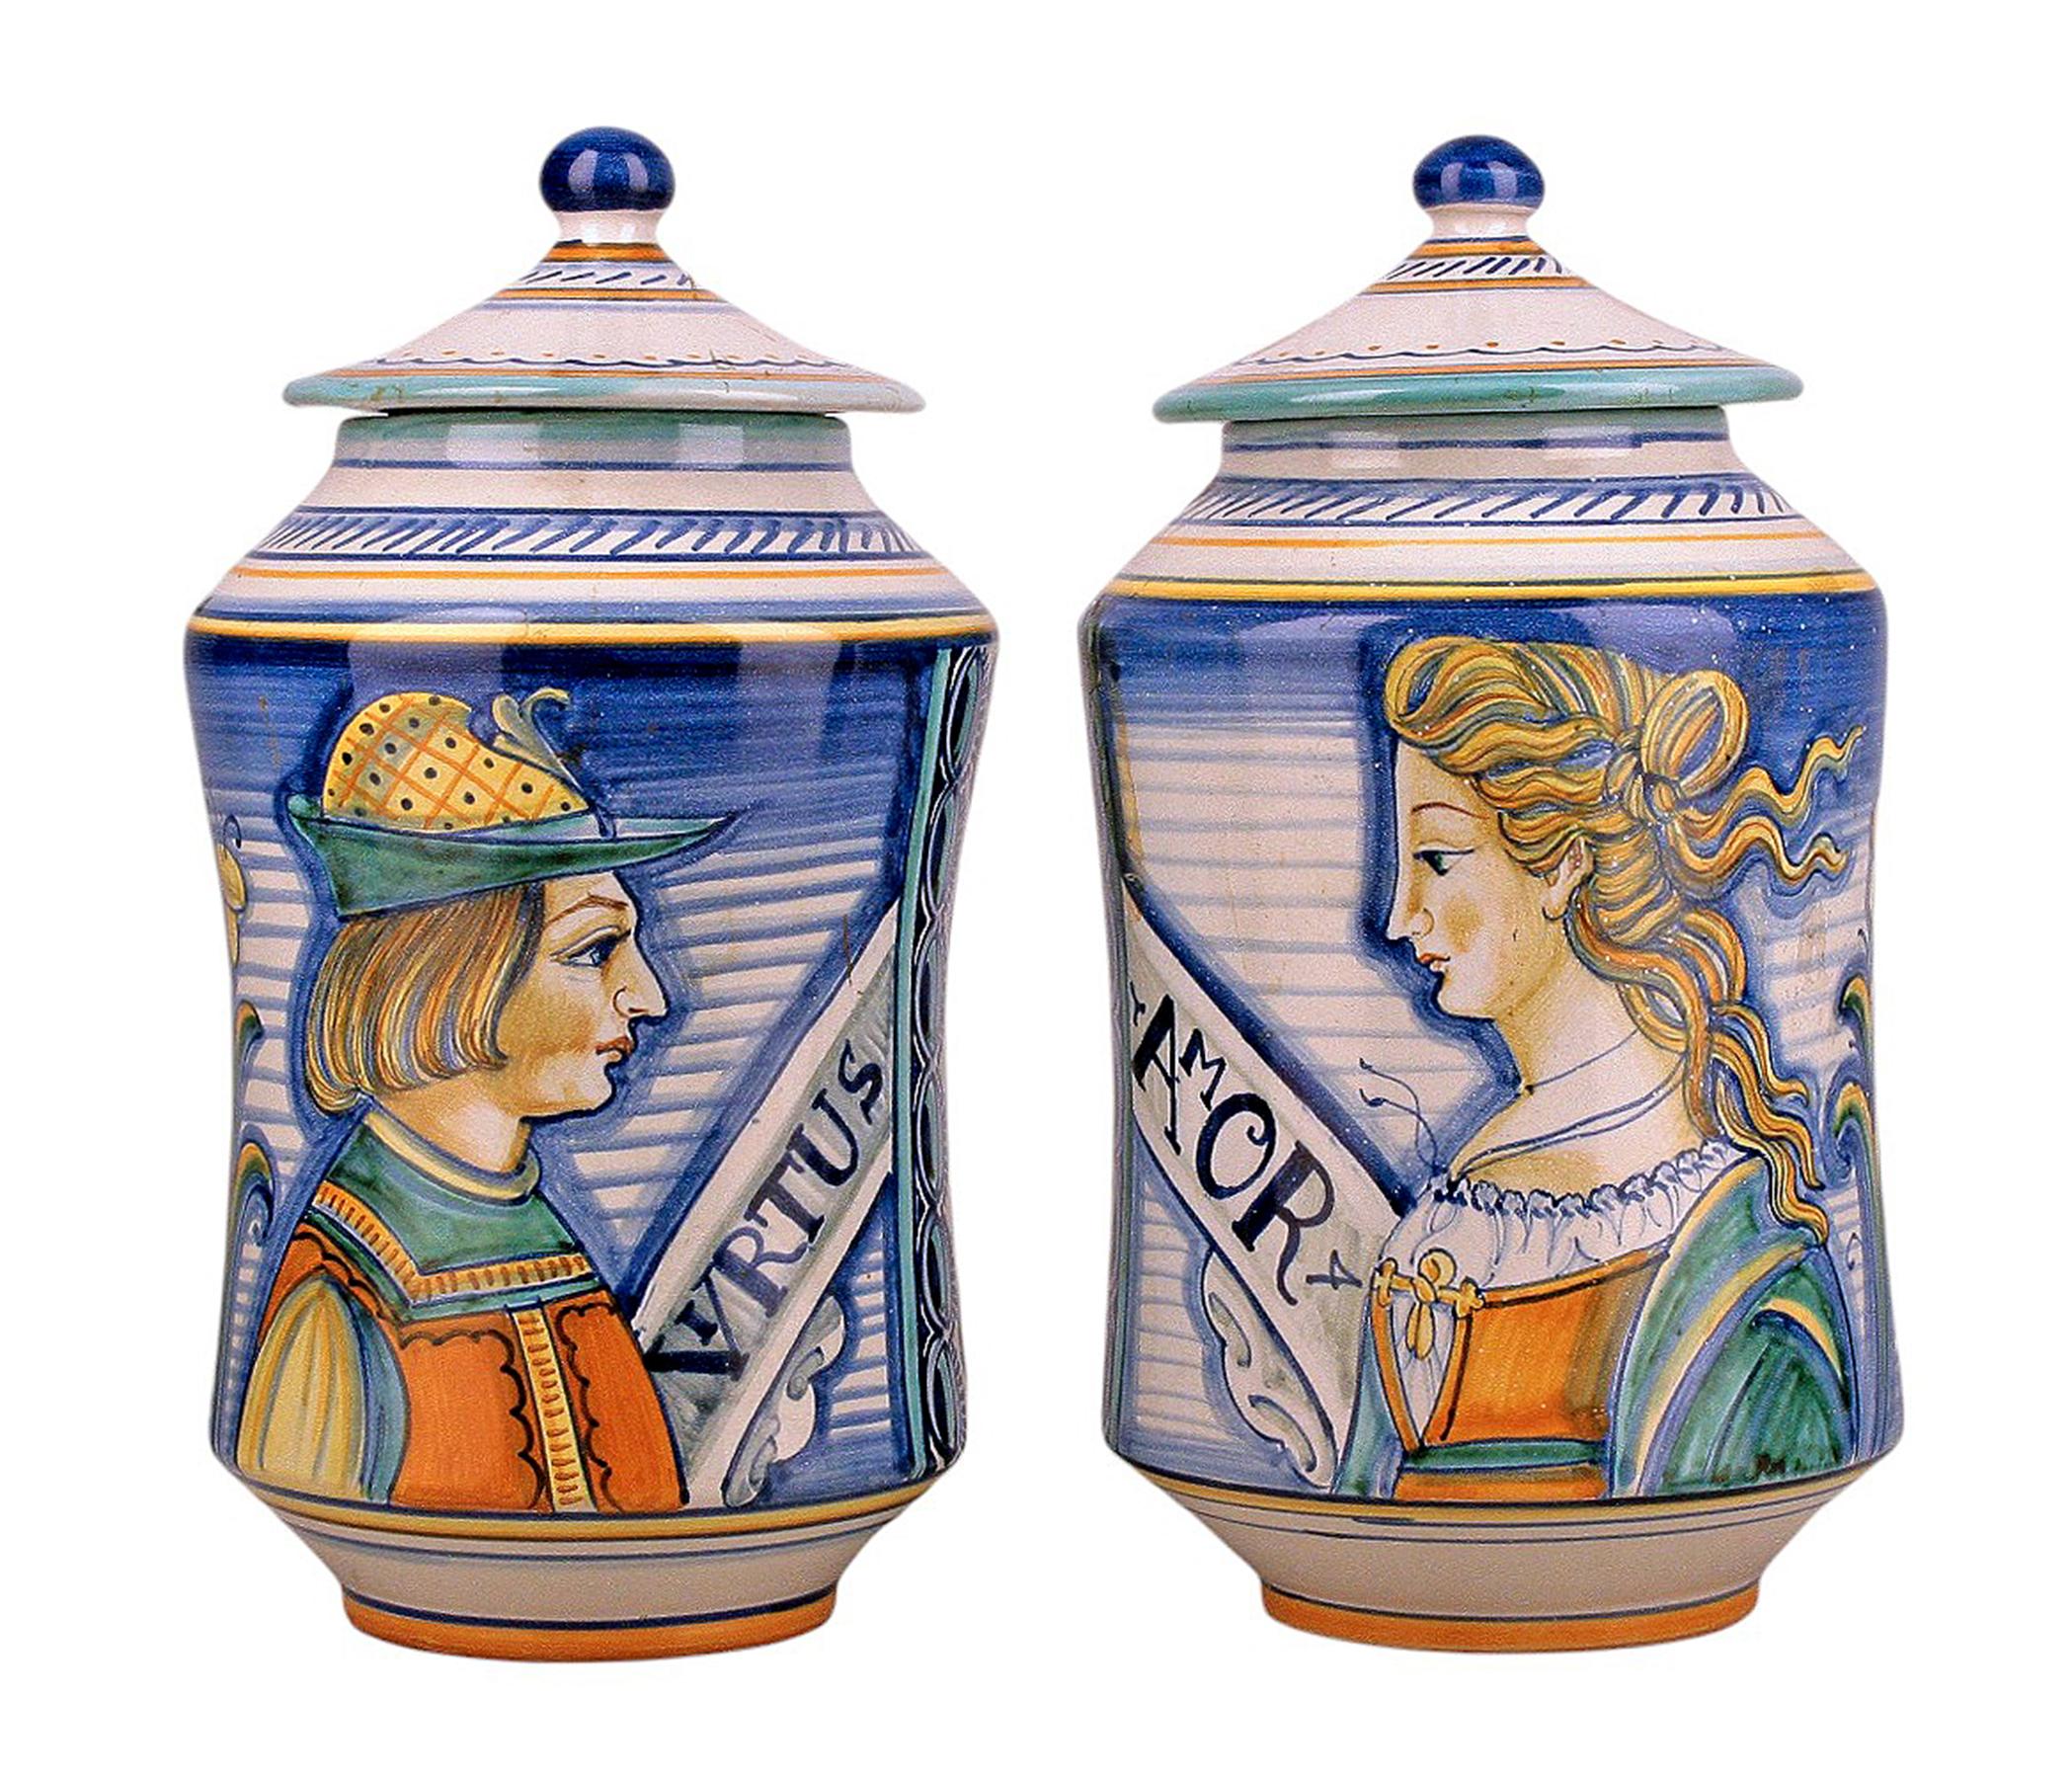 Pair of mid-20th century Renaissance Revival hand-painted ceramic jars with lids by Fratelli Mari from Deruta, Italy

By: Fratelli Mari, Deruta
Material: ceramic, paint, enamel
Technique: molded, pressed, hand-painted, painted, hand-crafted,